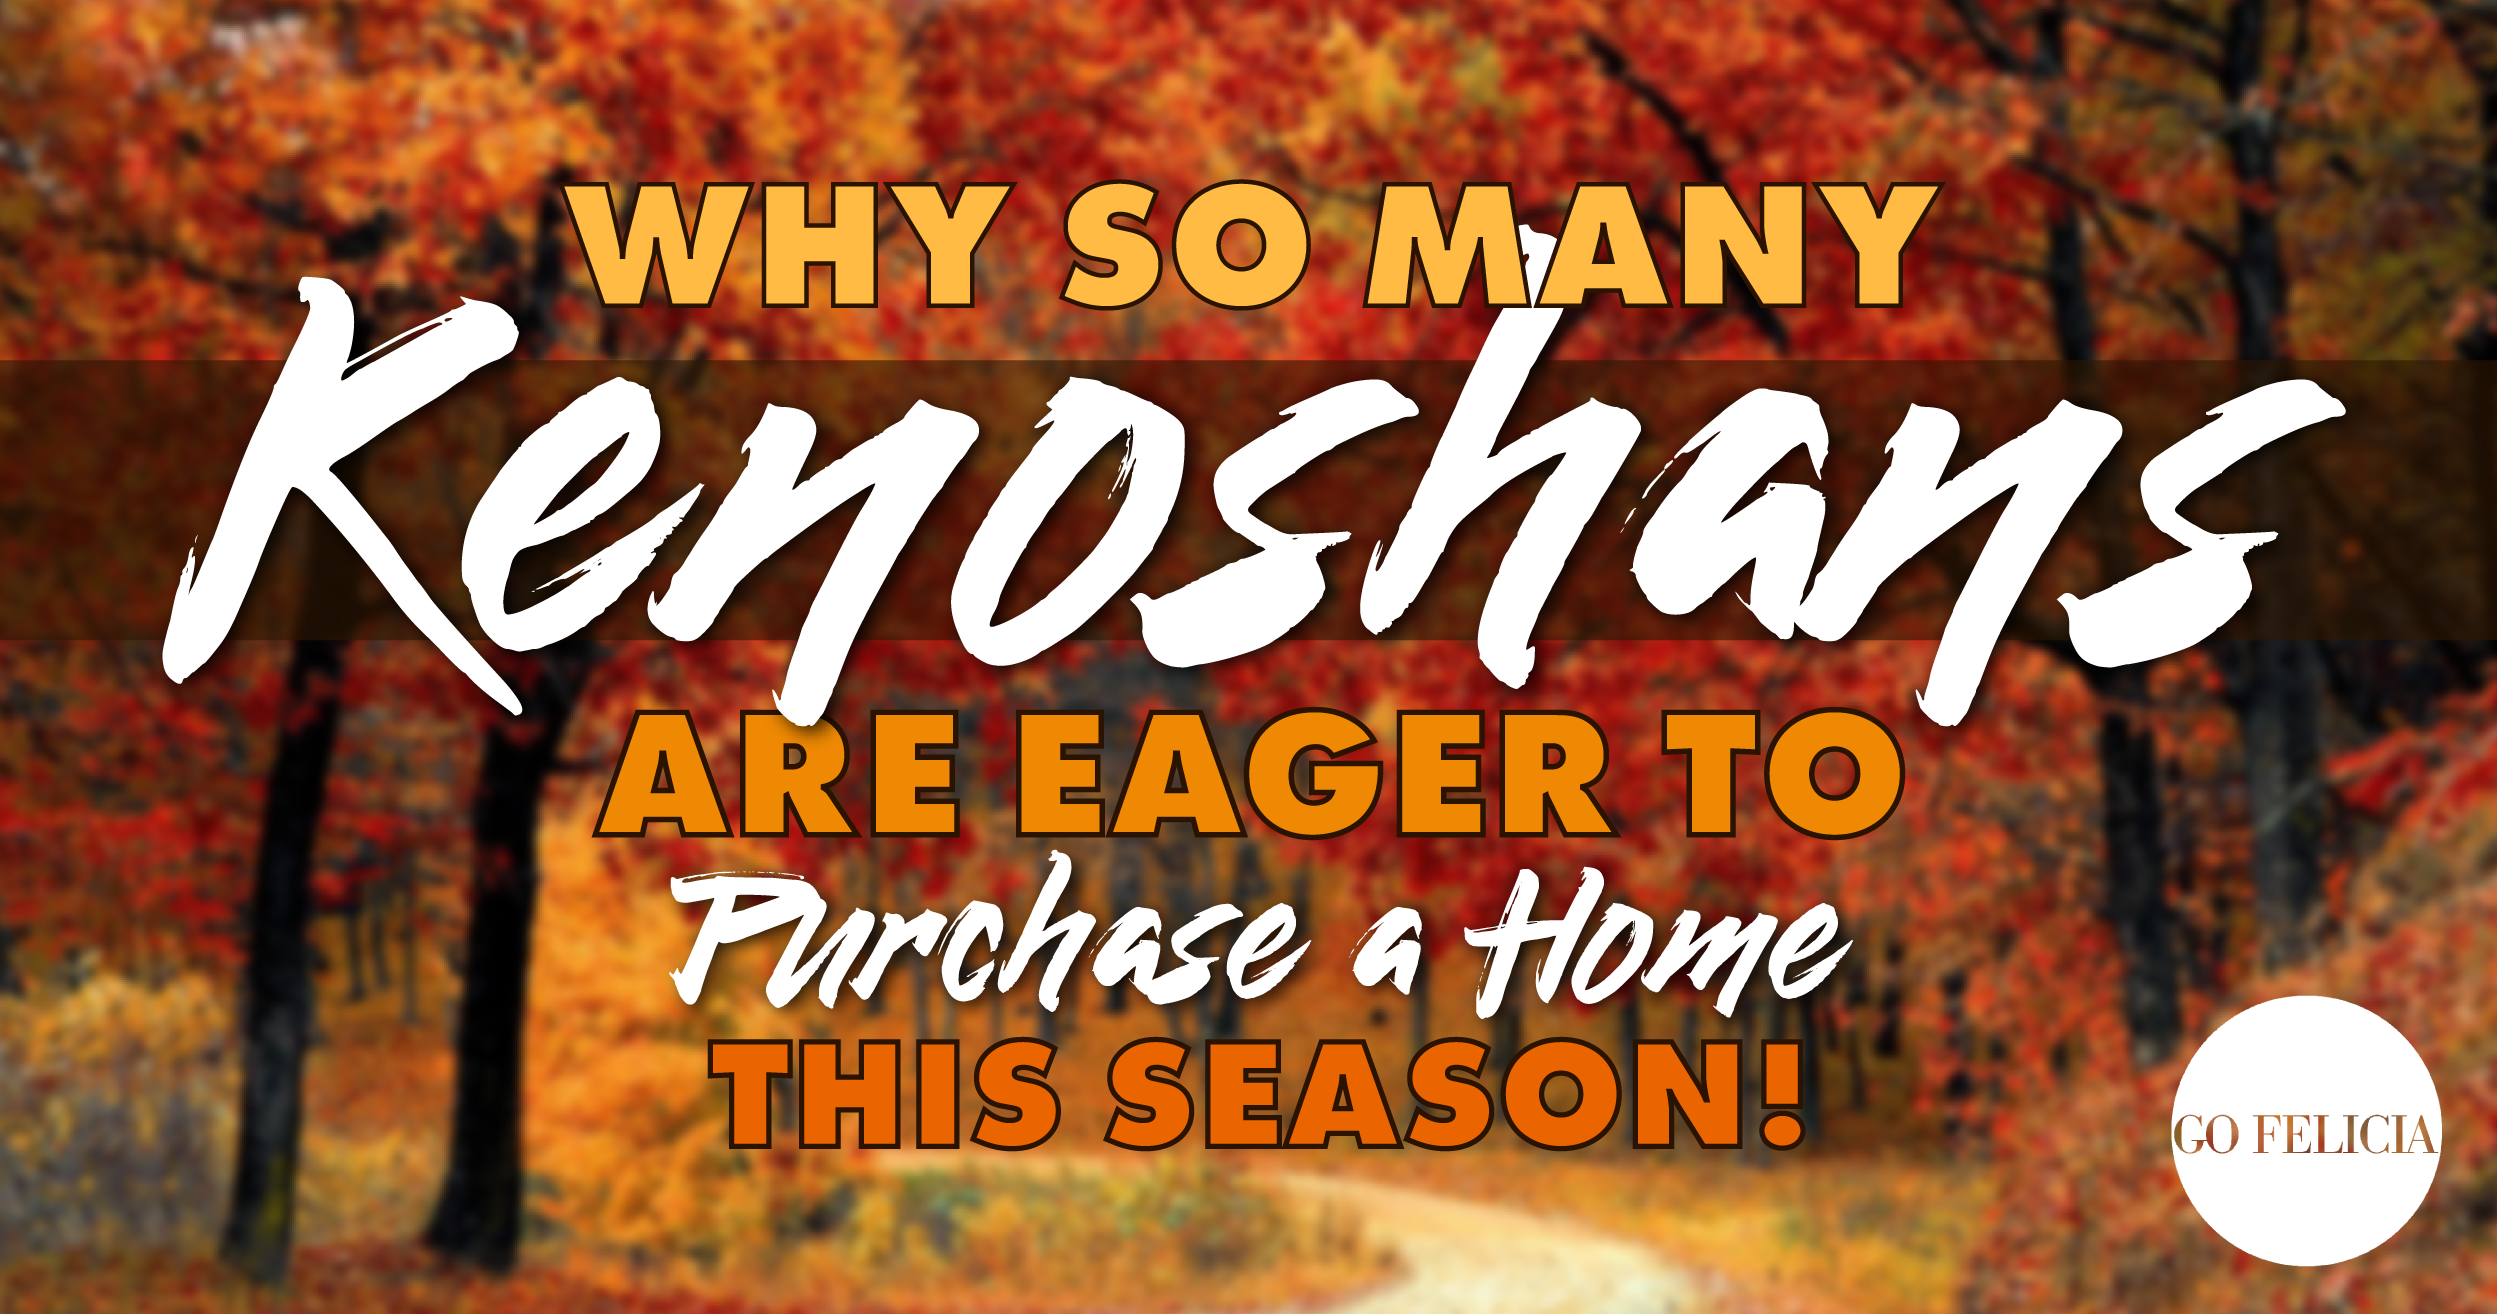 Why so many Kenoshans are eager to buy a home this season